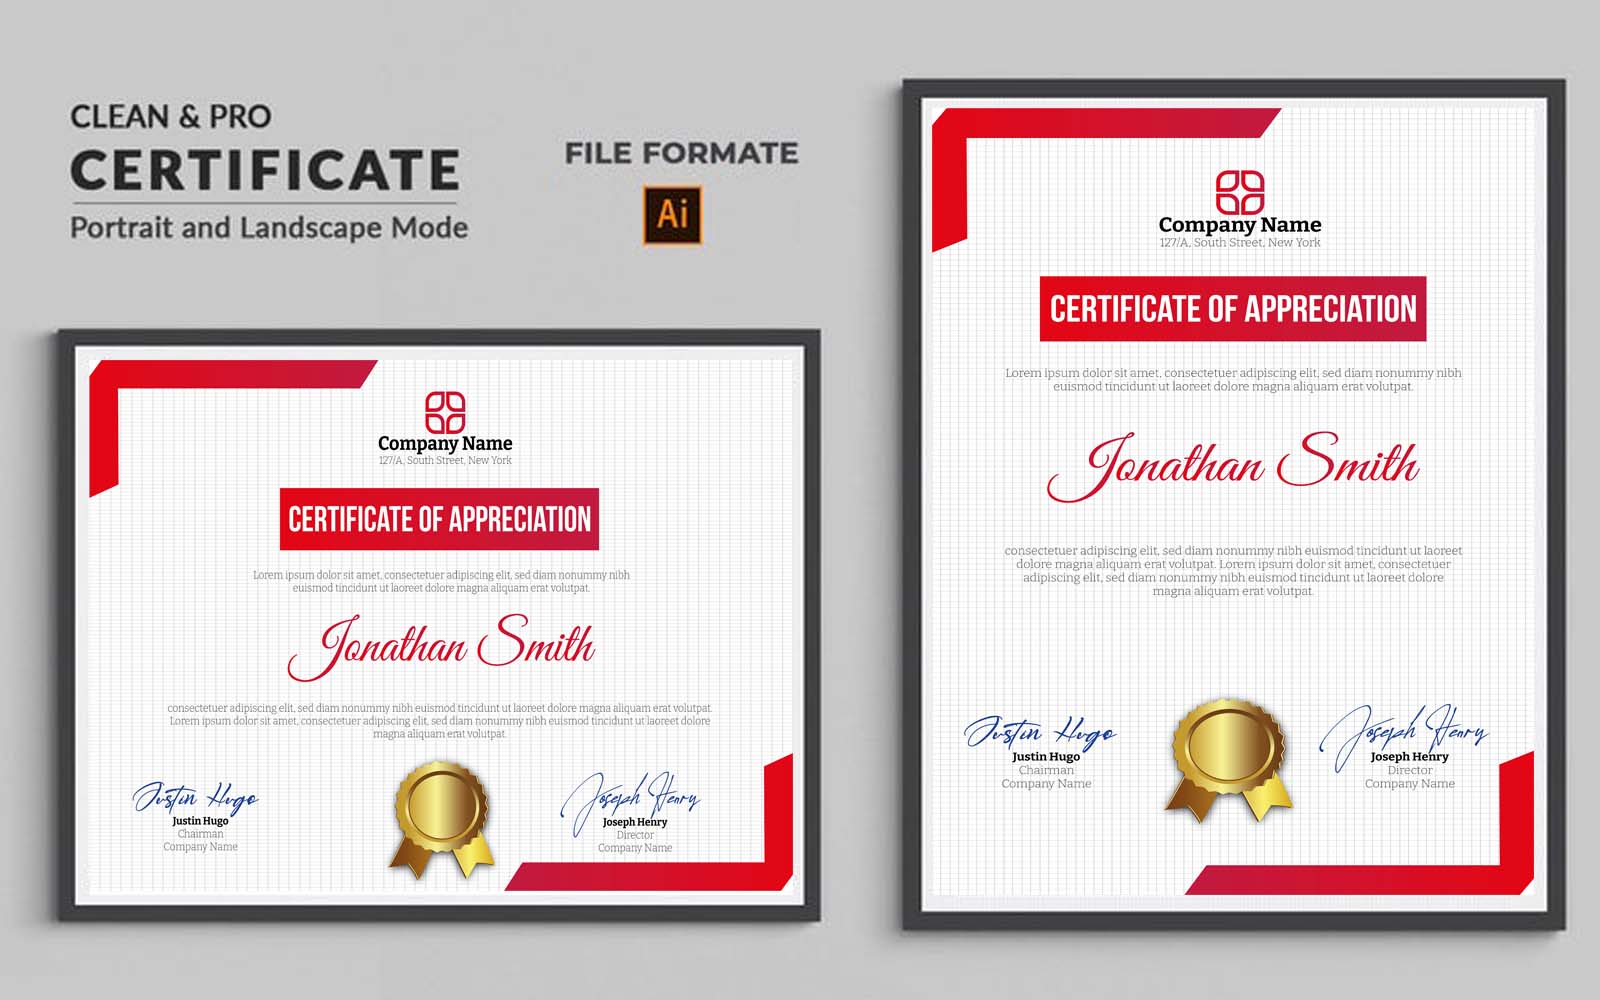 Corporate and Modern Certificate Template With Regard To Landscape Certificate Templates